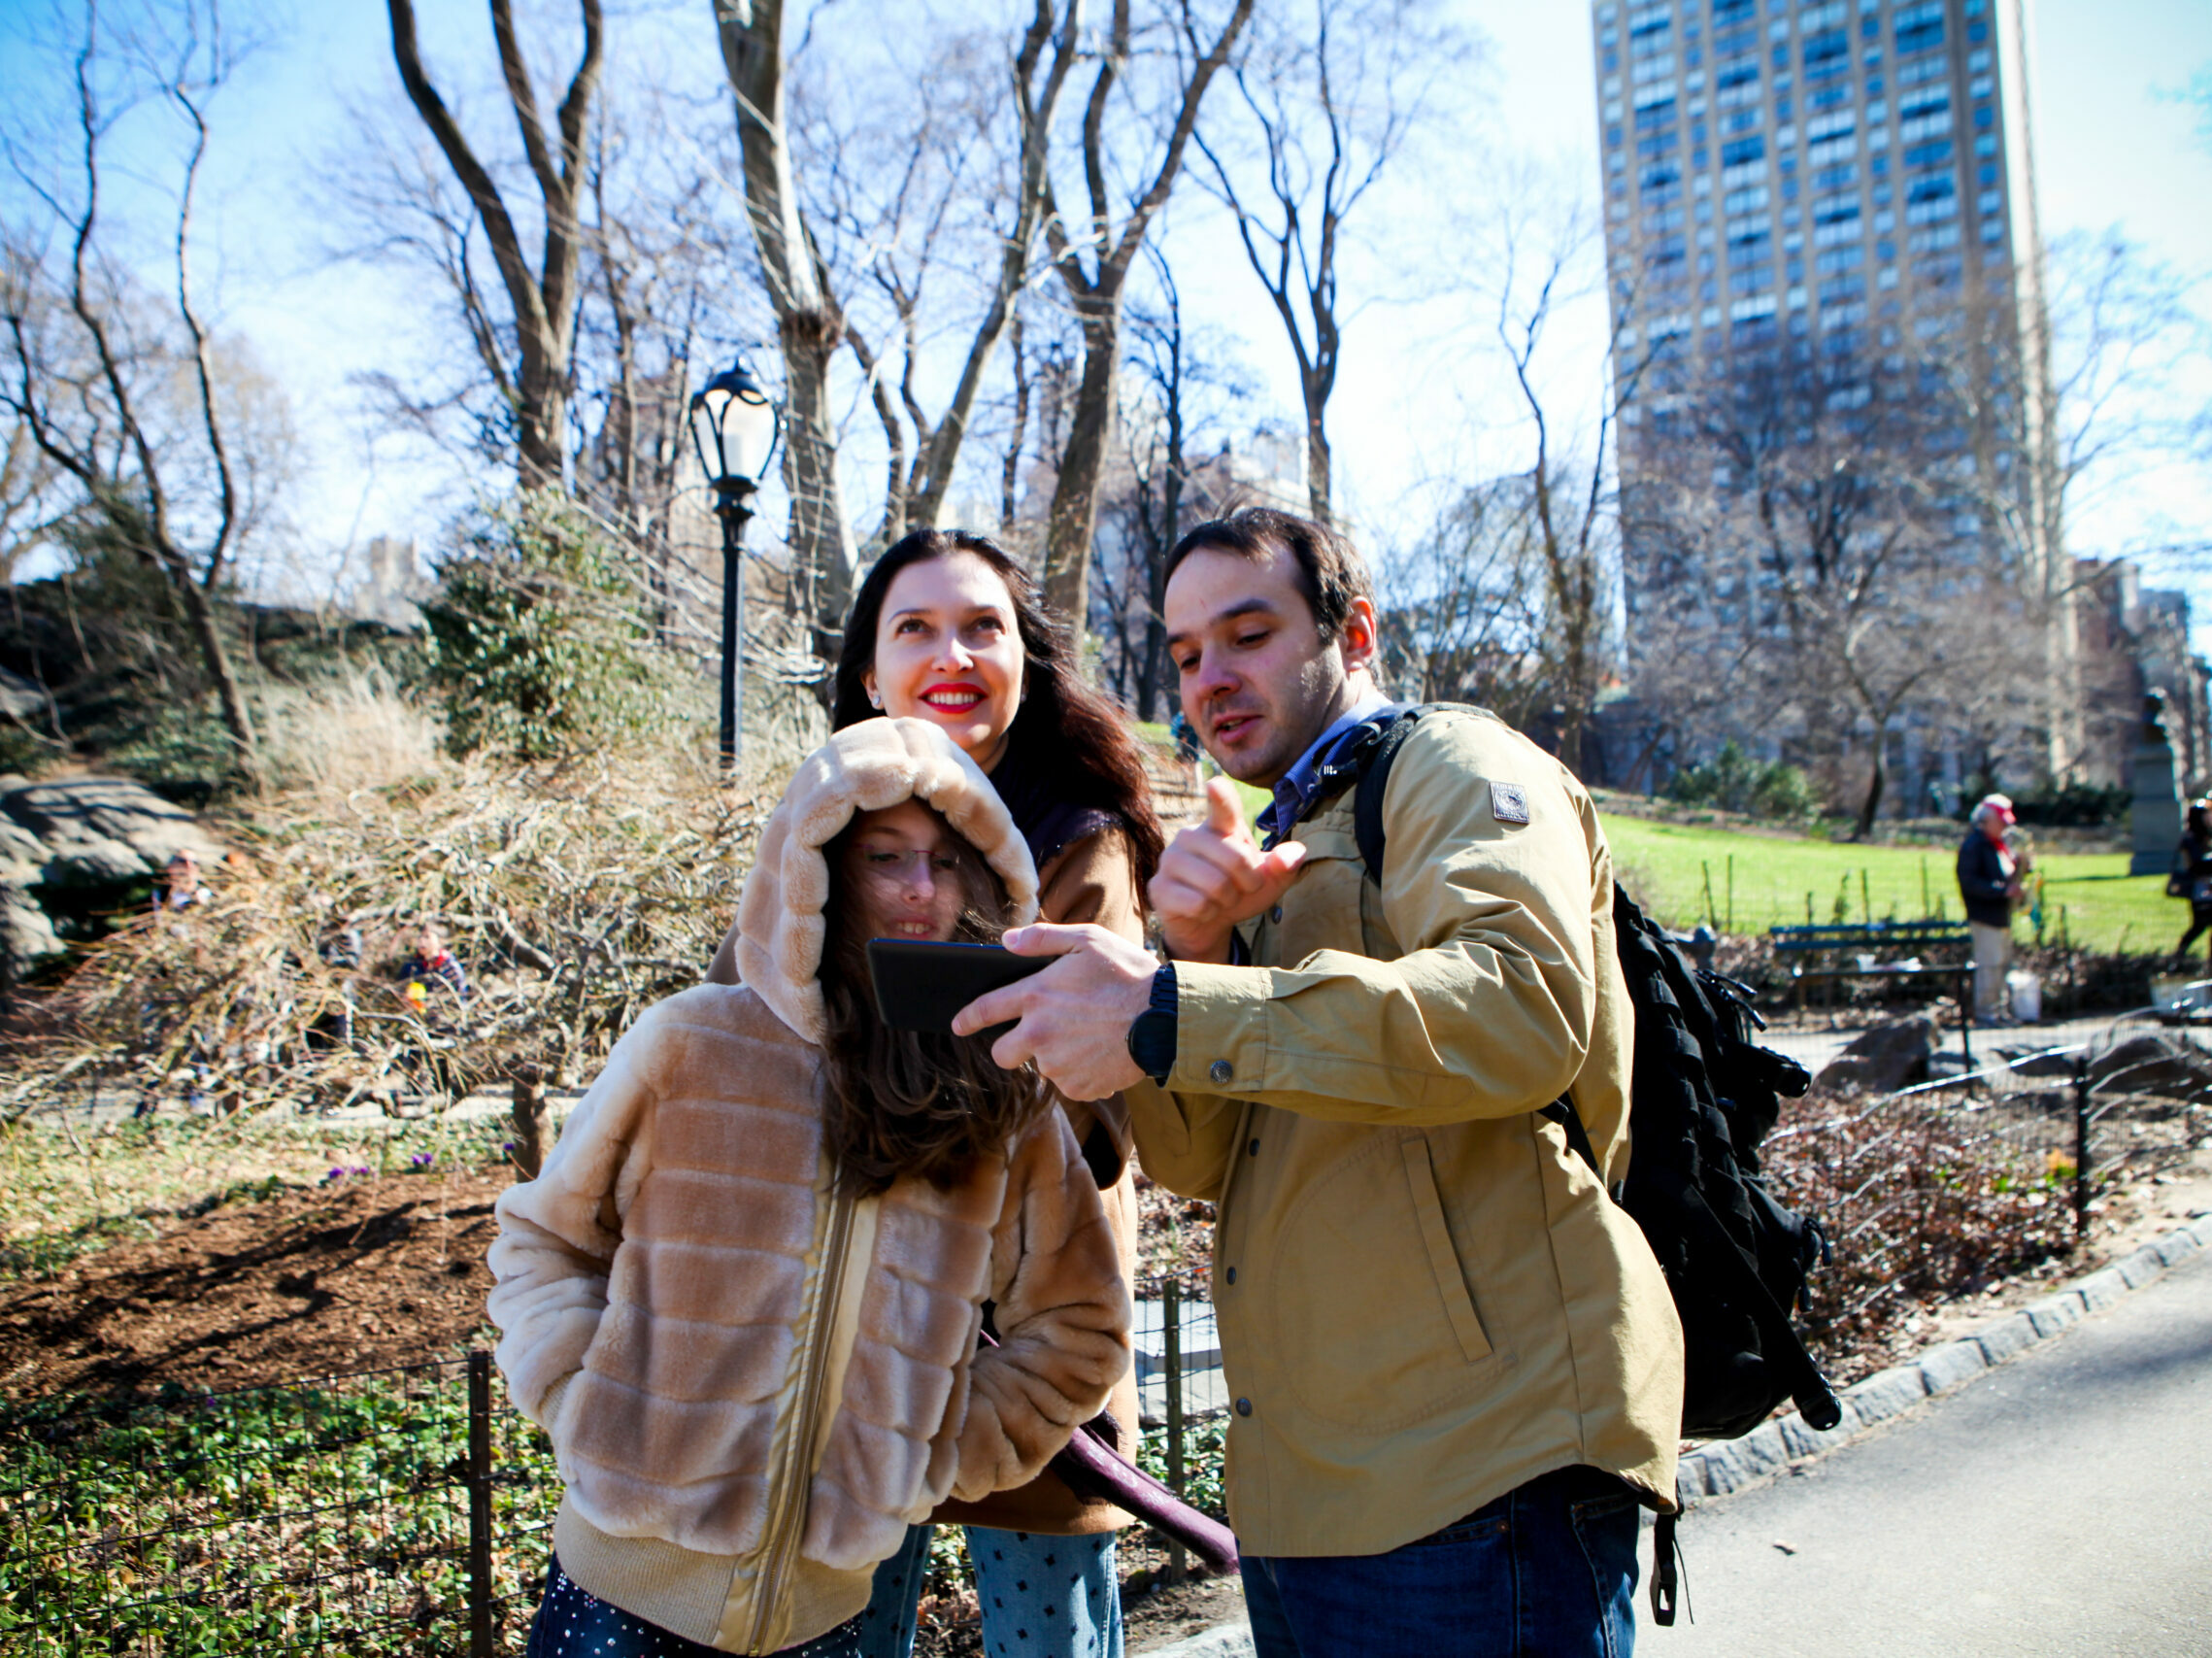 Slava shows something to two guests on a walking tour in early spring Central park